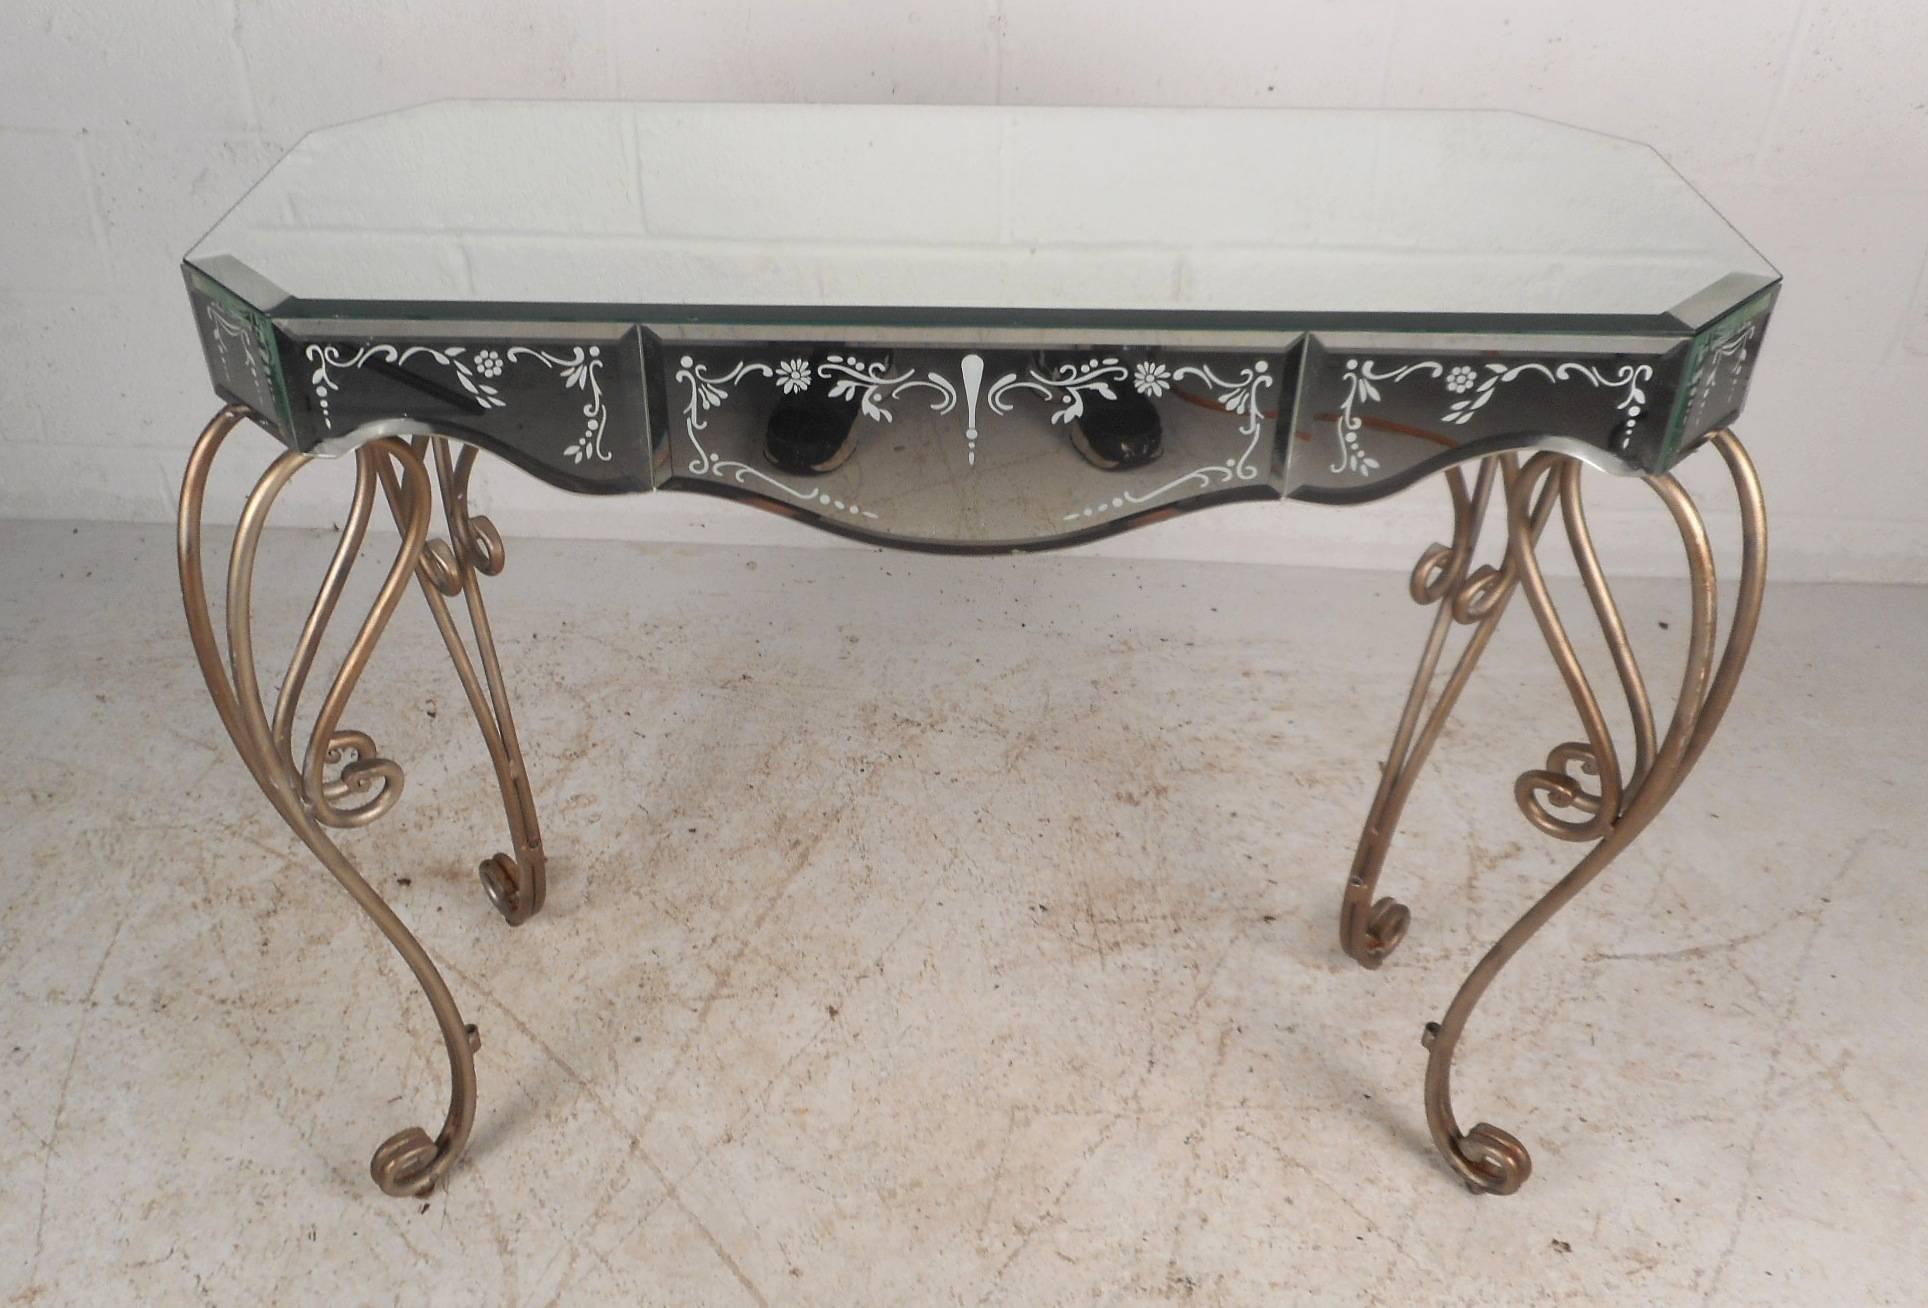 This gorgeous vintage modern hall table features sculptural mirrors all the way around with sleek bevelled edges. Unique design with white imprint designs on the sides and unusual metal legs with scroll detail. Sturdy and stylish table can be used